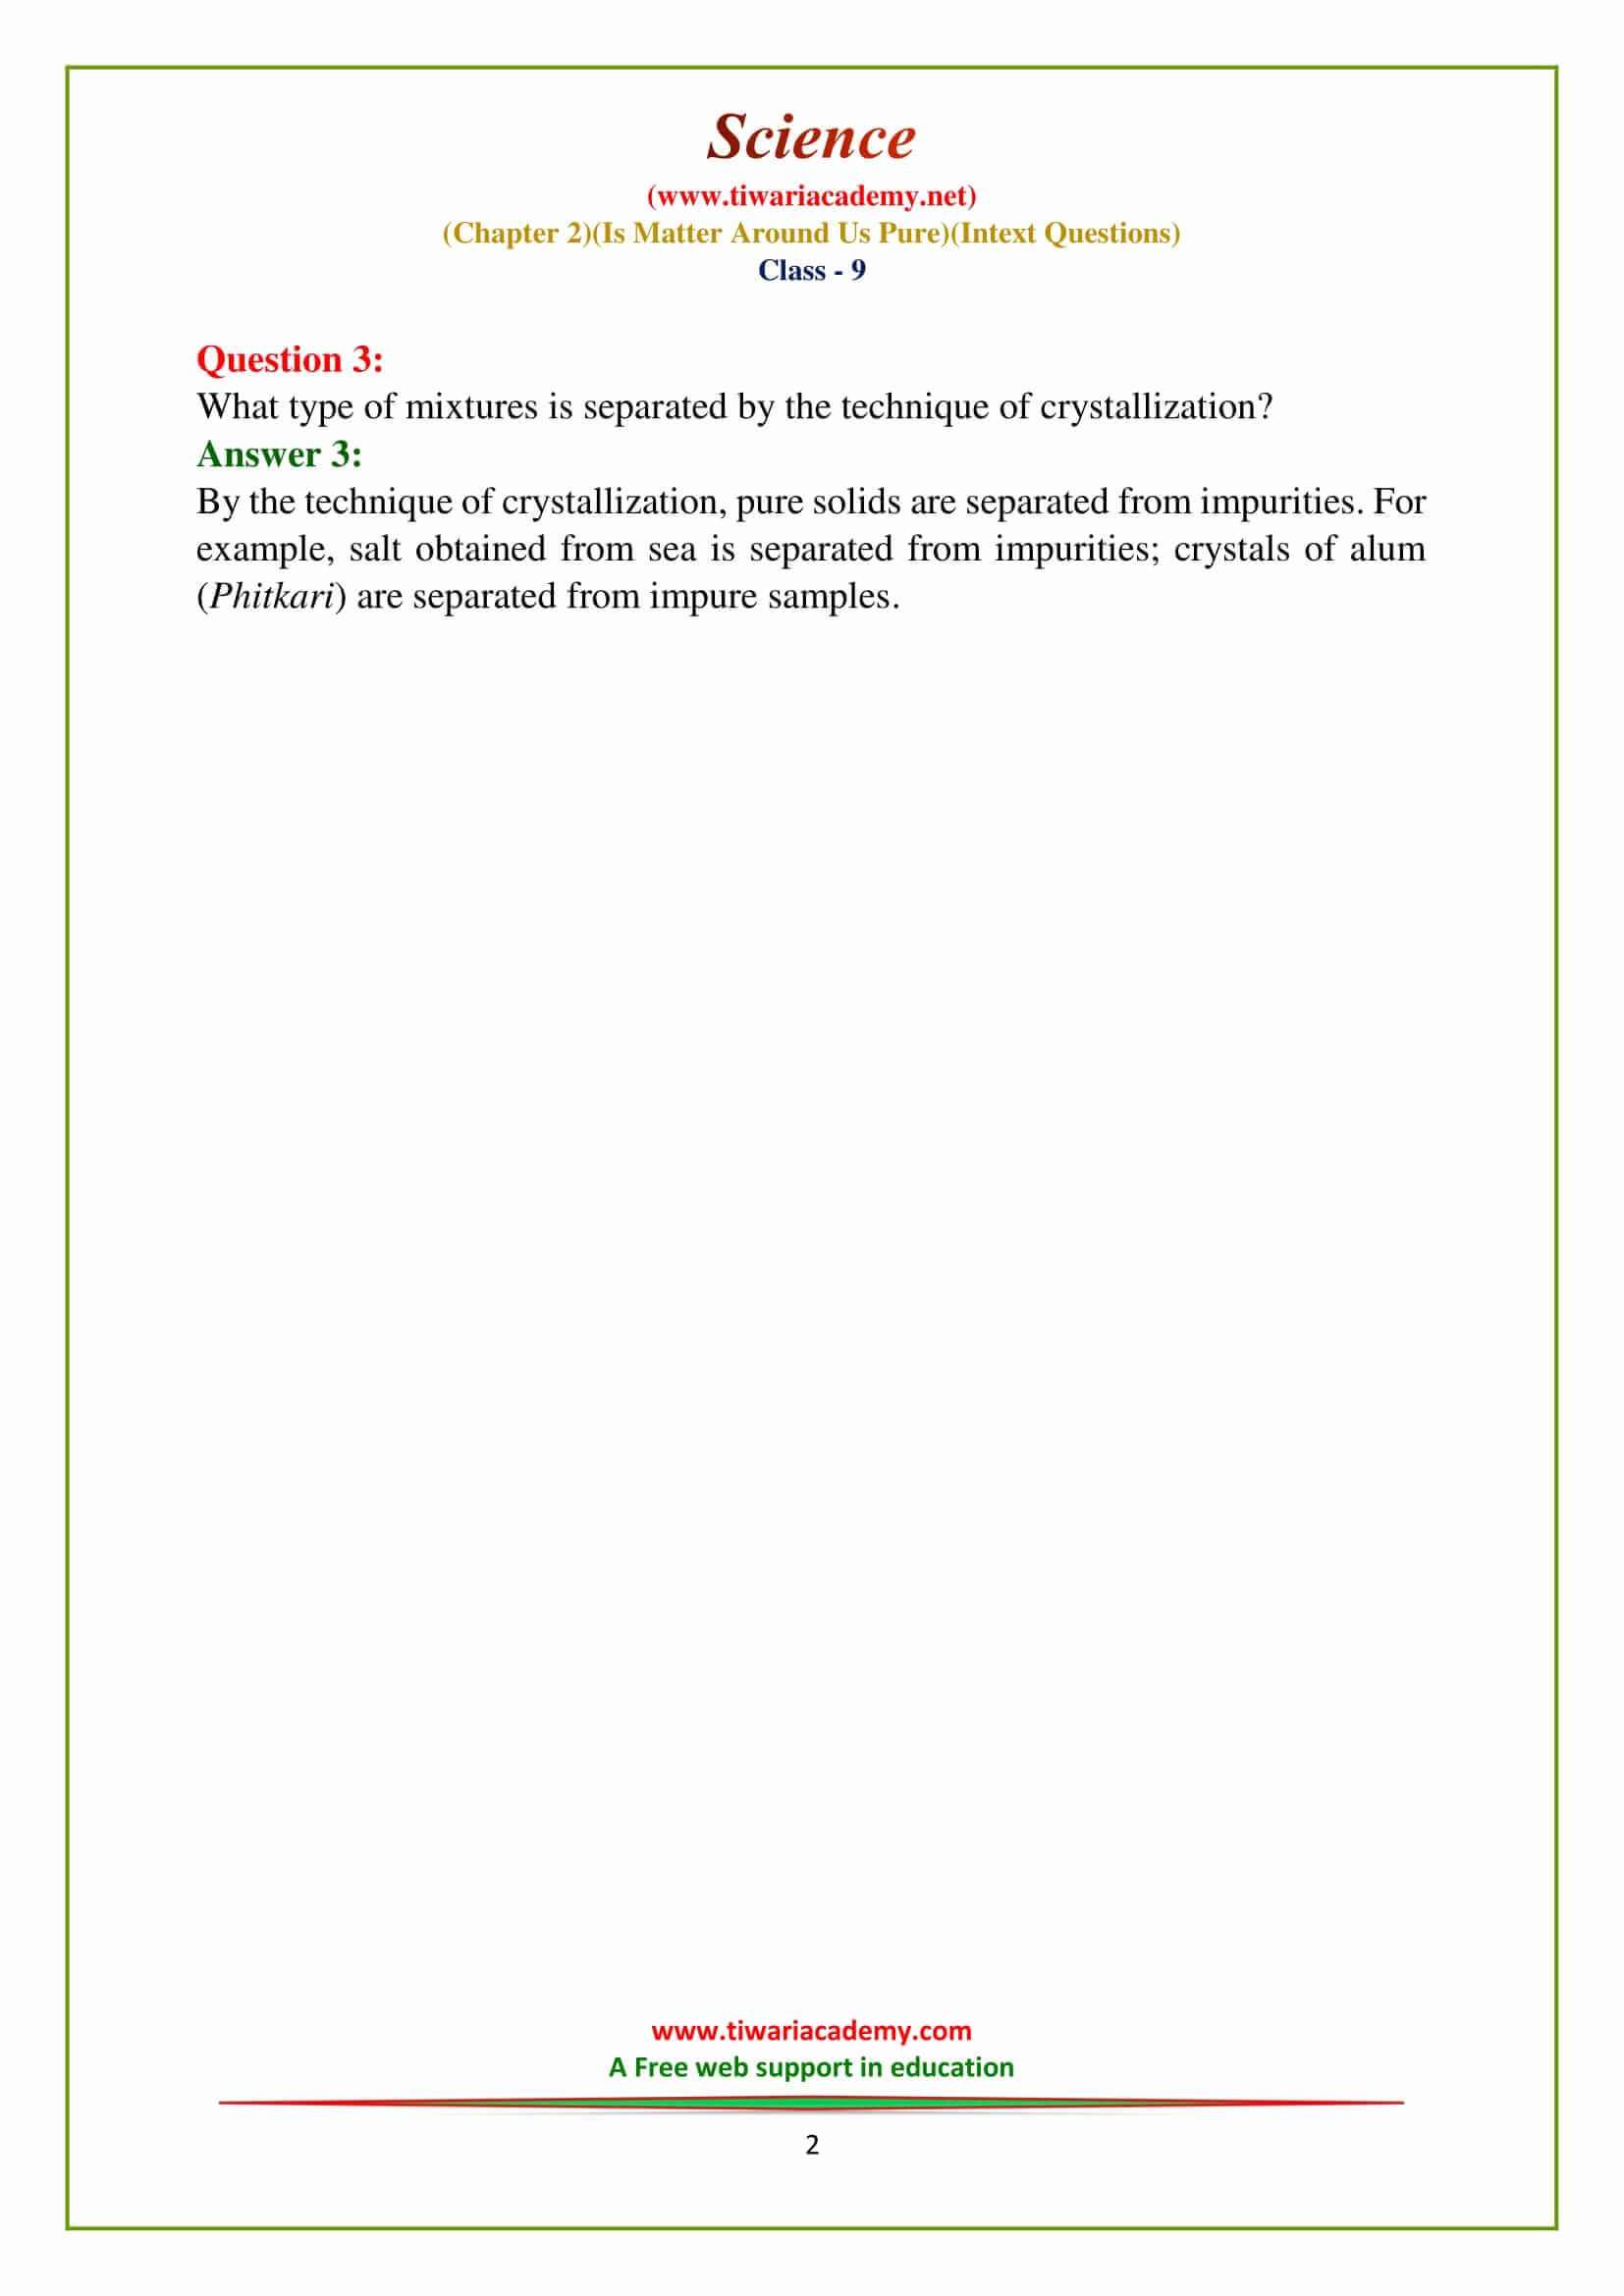 NCERT Solutions for Class 9 Science Chapter 2 Is Matter Around Us Pure page 24 questions answres intext